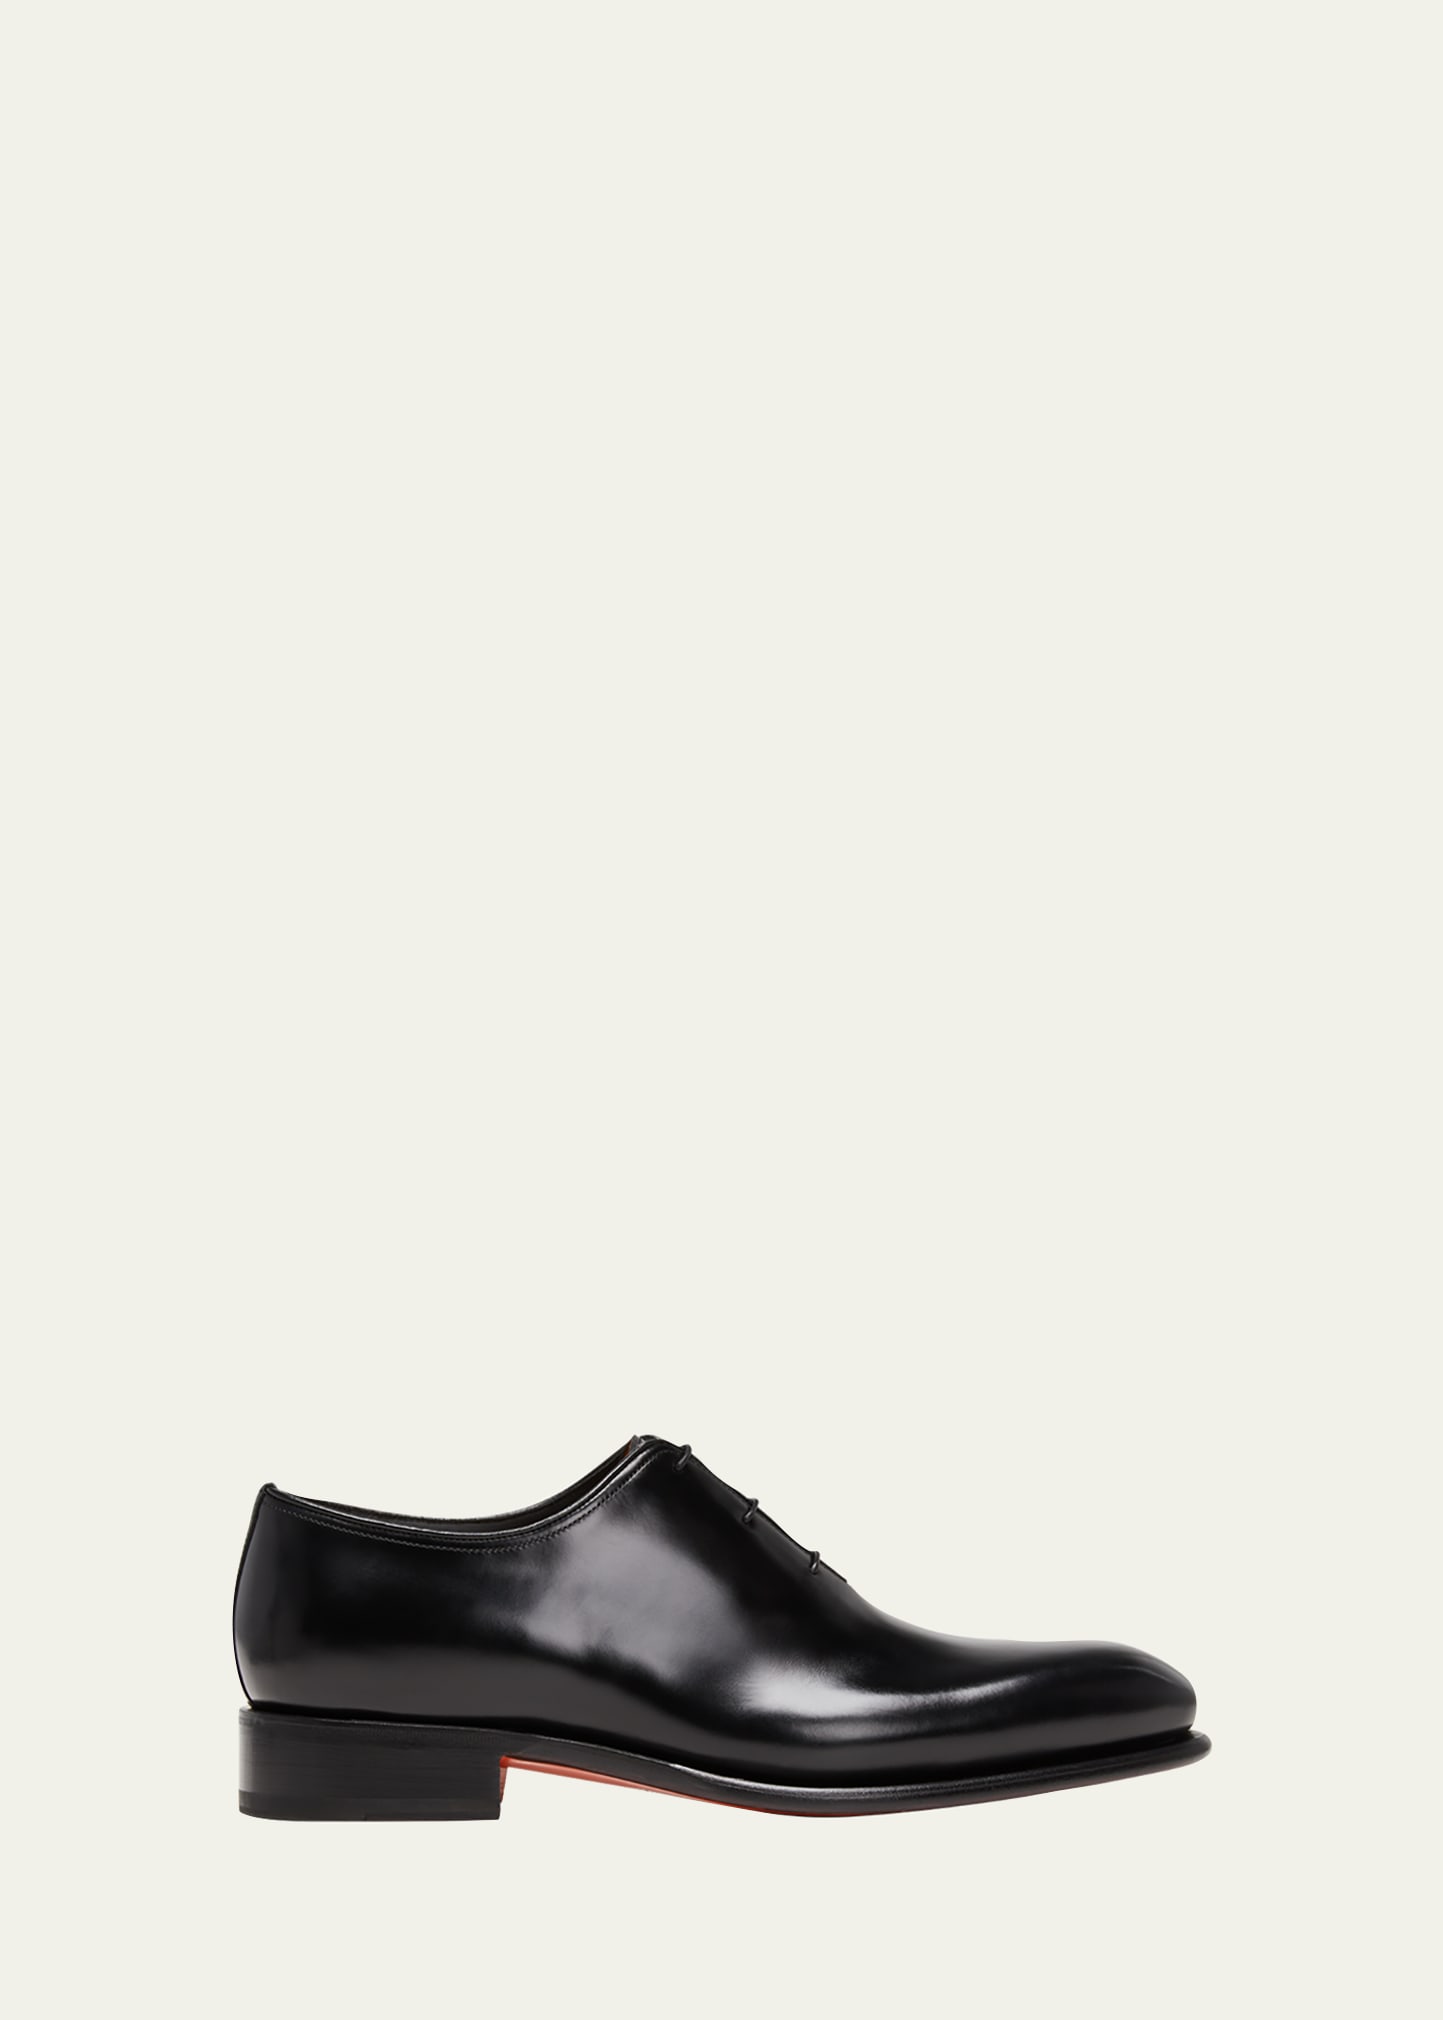 Men's People Leather Dress Oxfords